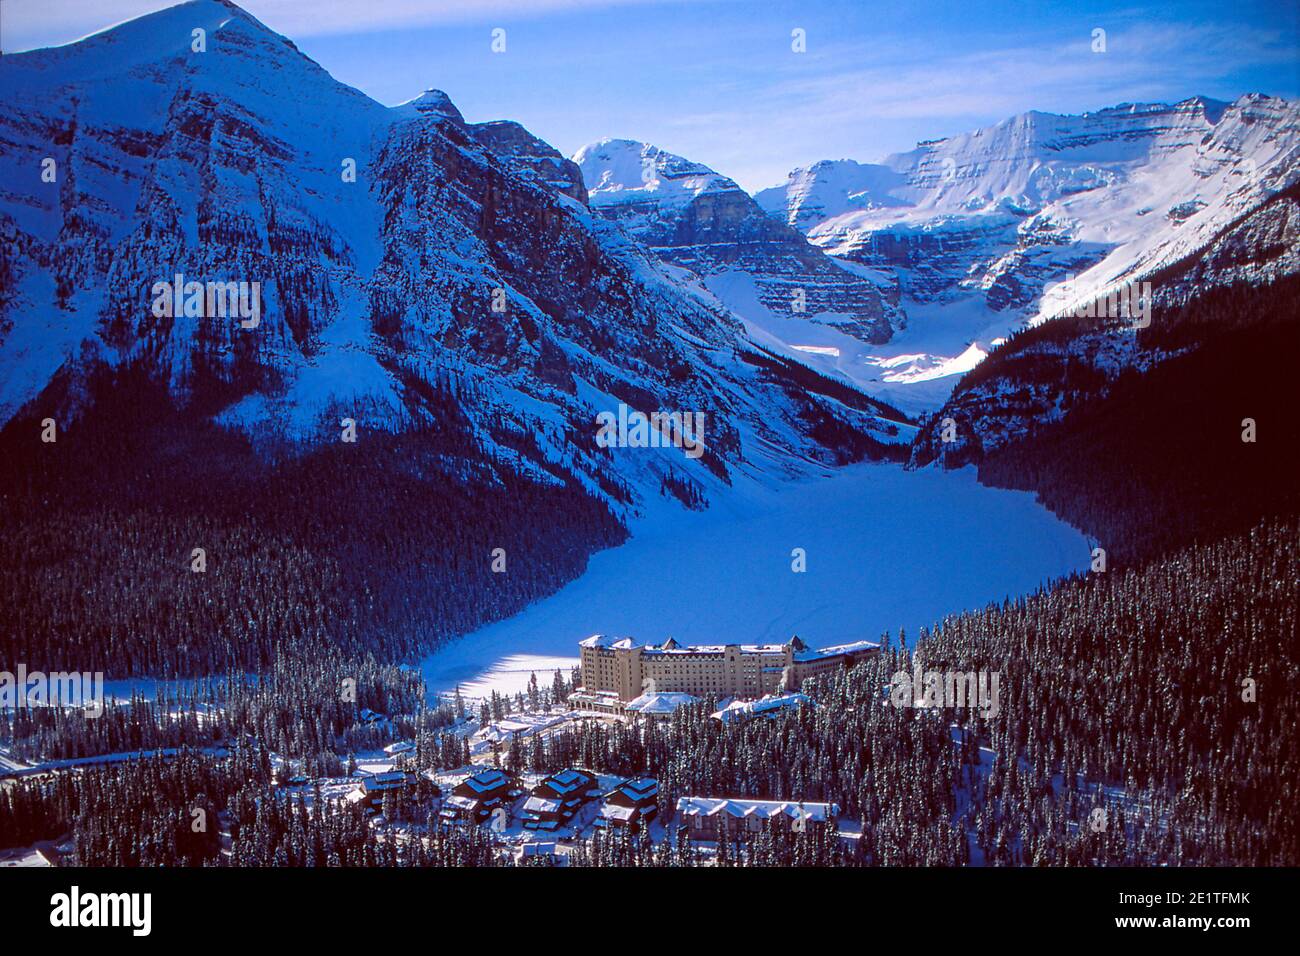 Aerial view of the Chateau Lake Louise Hotel in winter Banff Alberta Canada Stock Photo